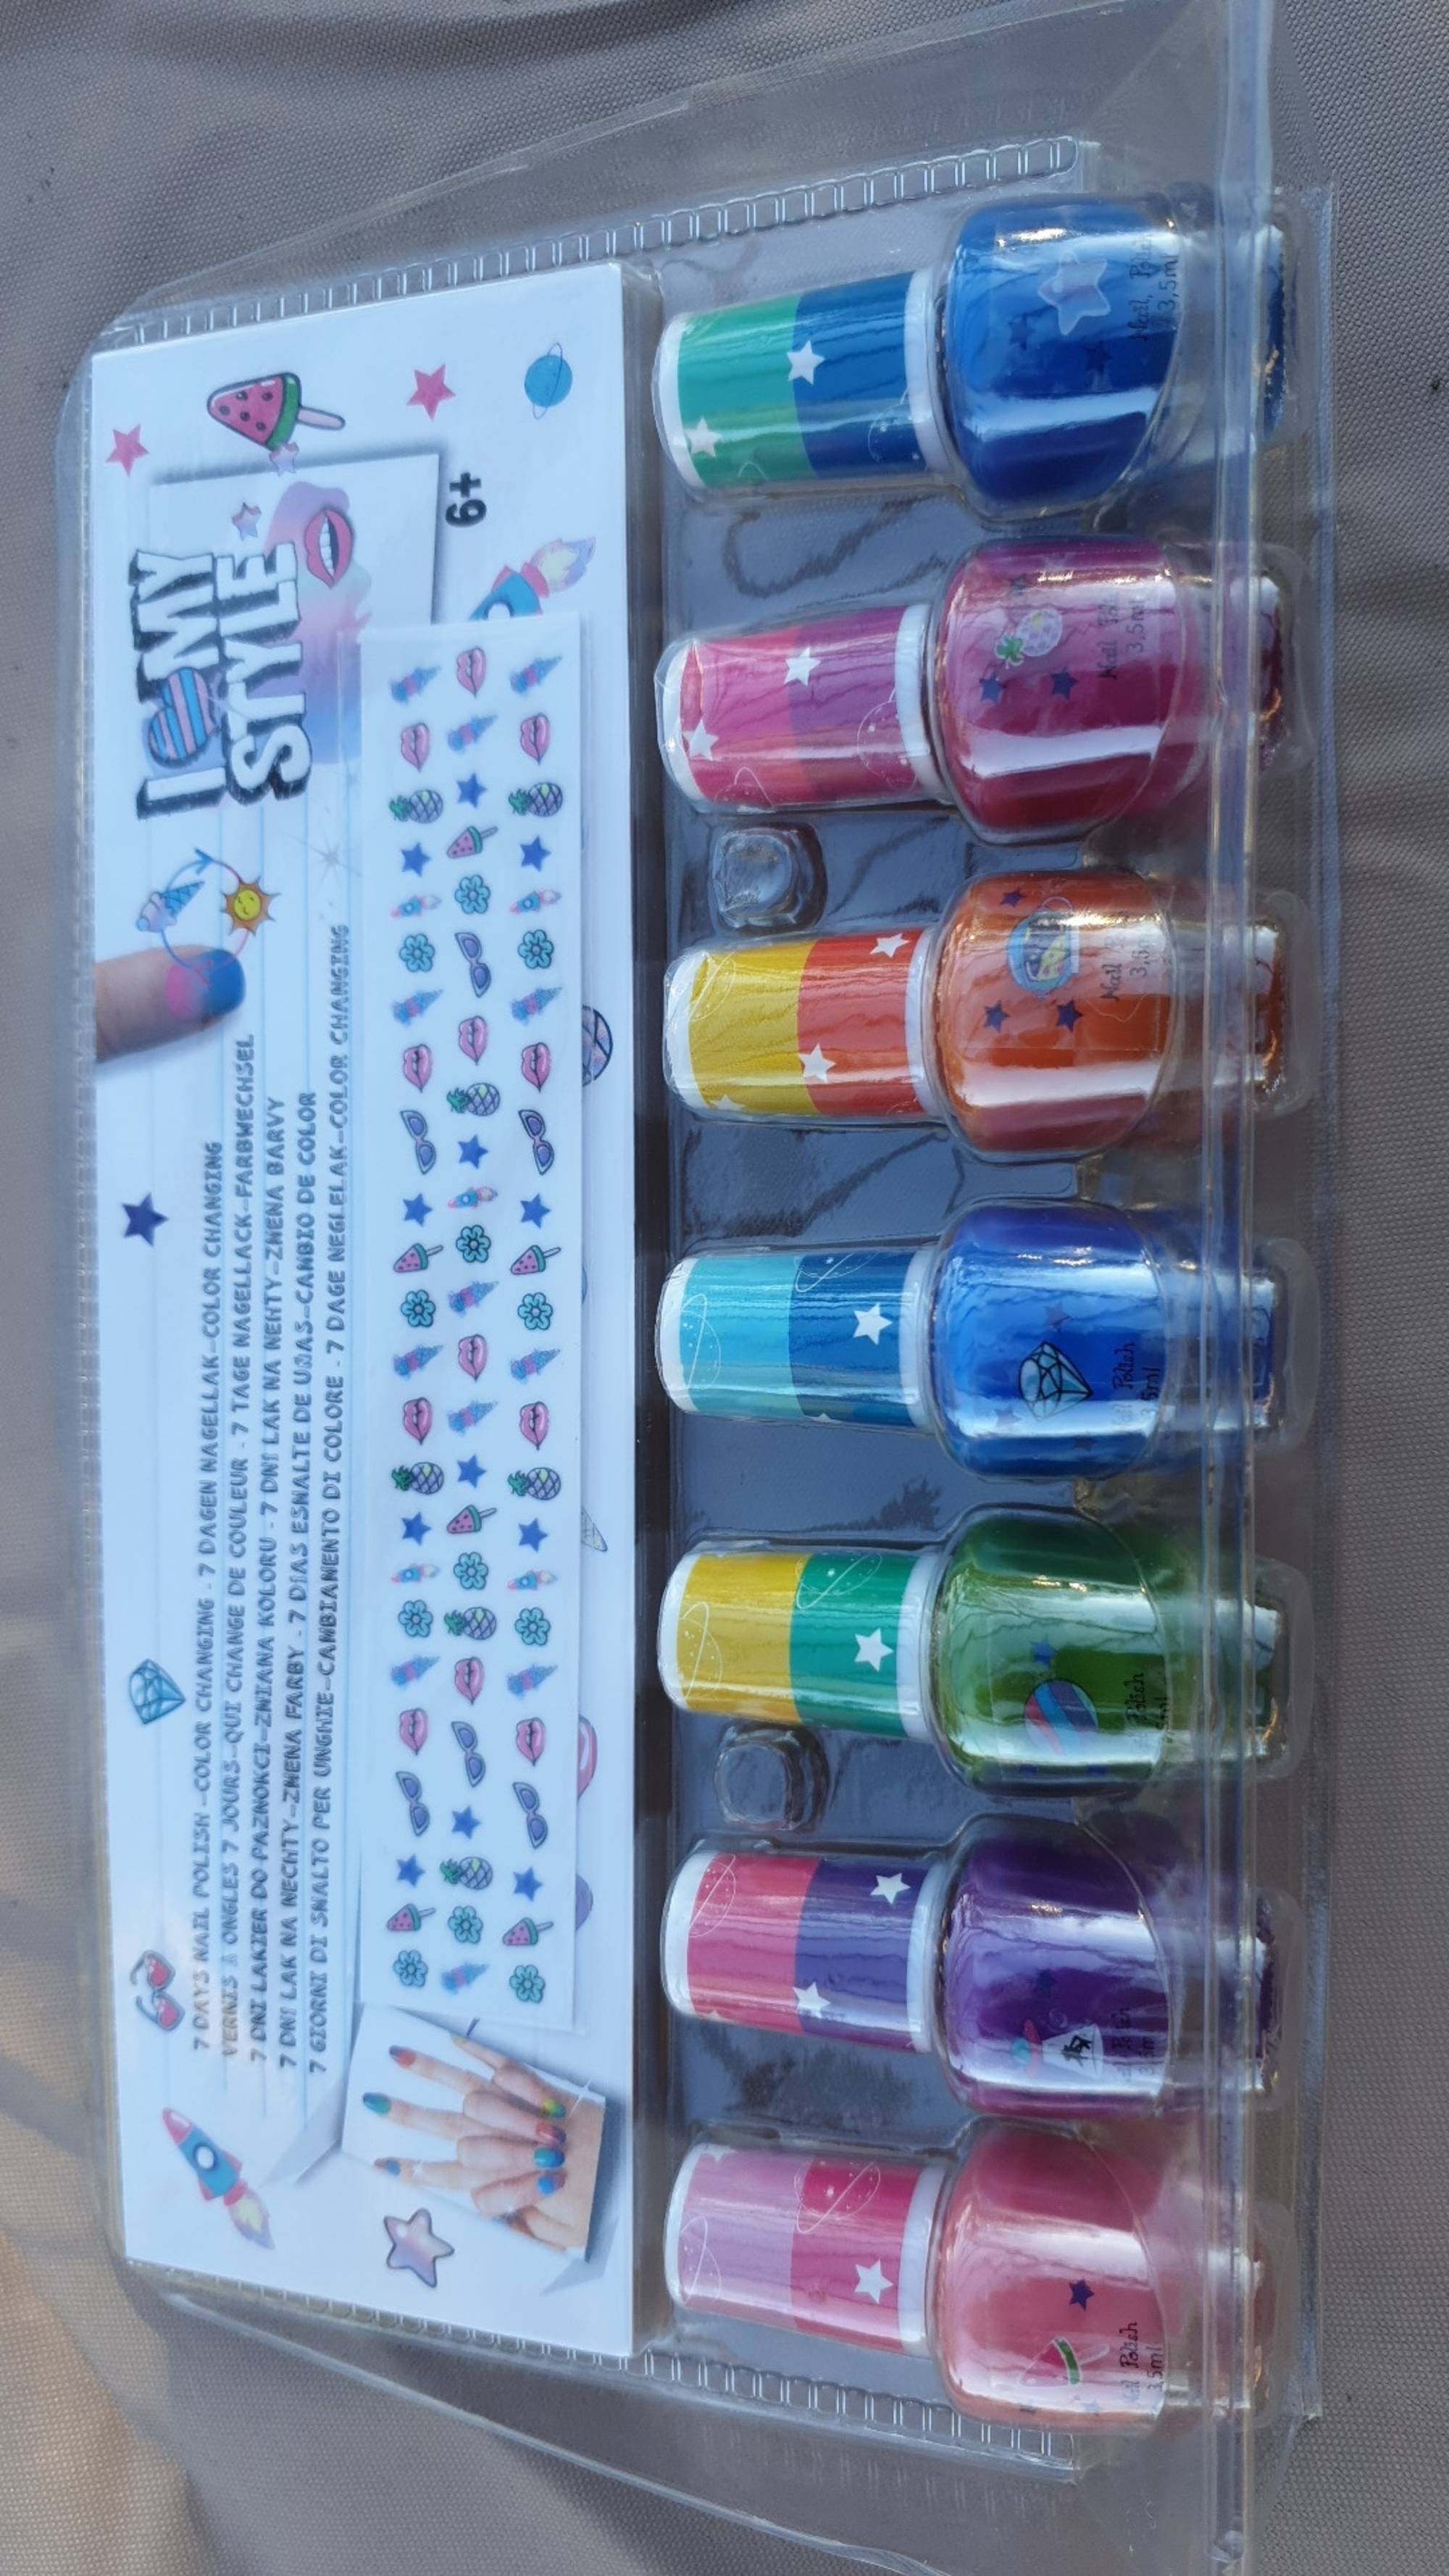 I LOVE MY STYLE - Enfant - Vernis à ongles 7 jours